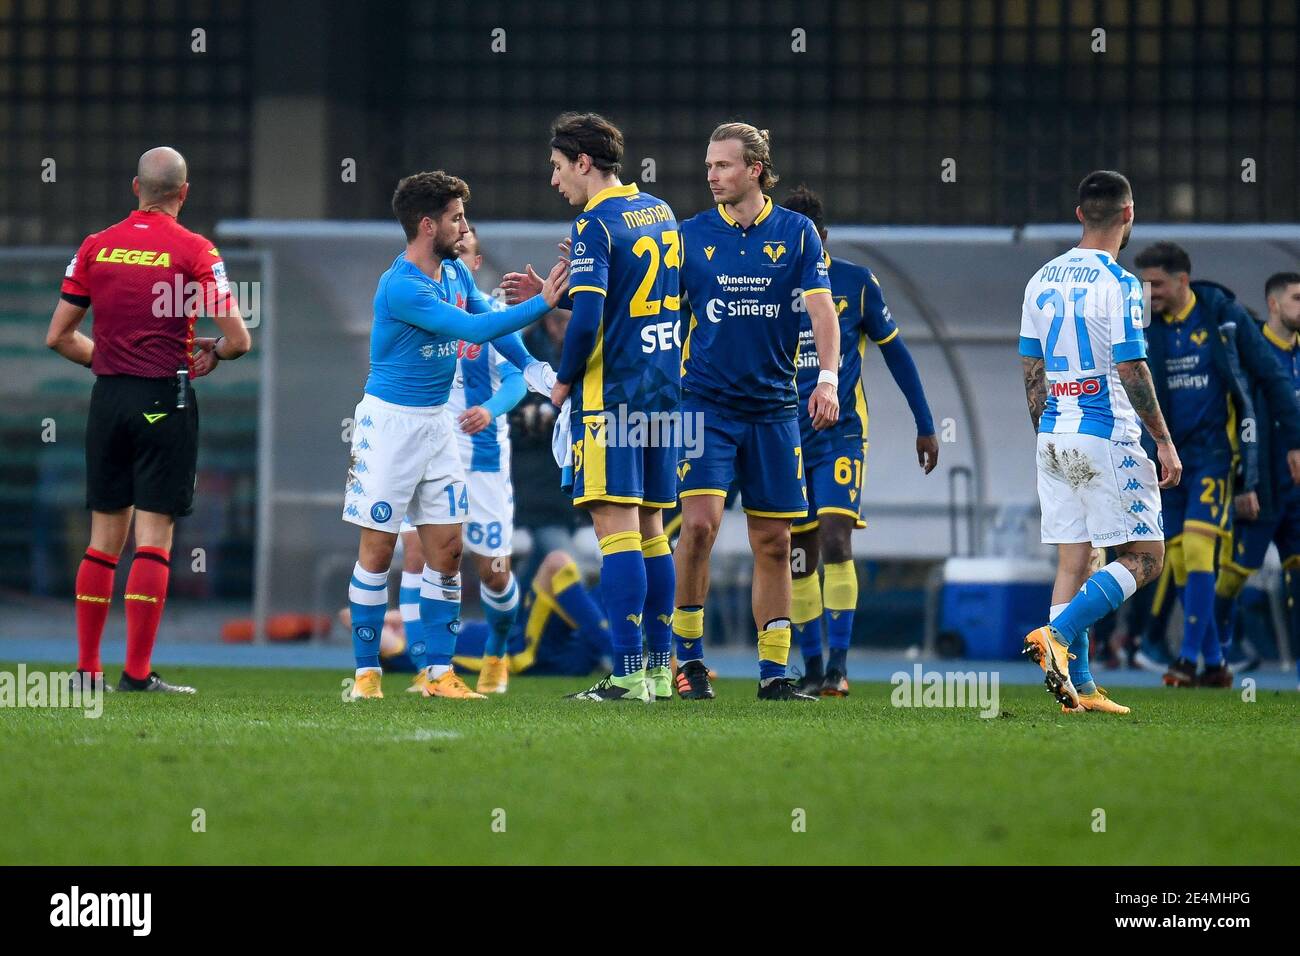 Verona, Italy. 24th Jan, 2021. Greetings between Giangiacomo Magnani and Antonin Barak (Hellas Verona) with Dries Mertens (Napoli) at the end of the match during Hellas Verona vs SSC Napoli, Italian football Serie A match in Verona, Italy, January 24 2021 Credit: Independent Photo Agency/Alamy Live News Stock Photo